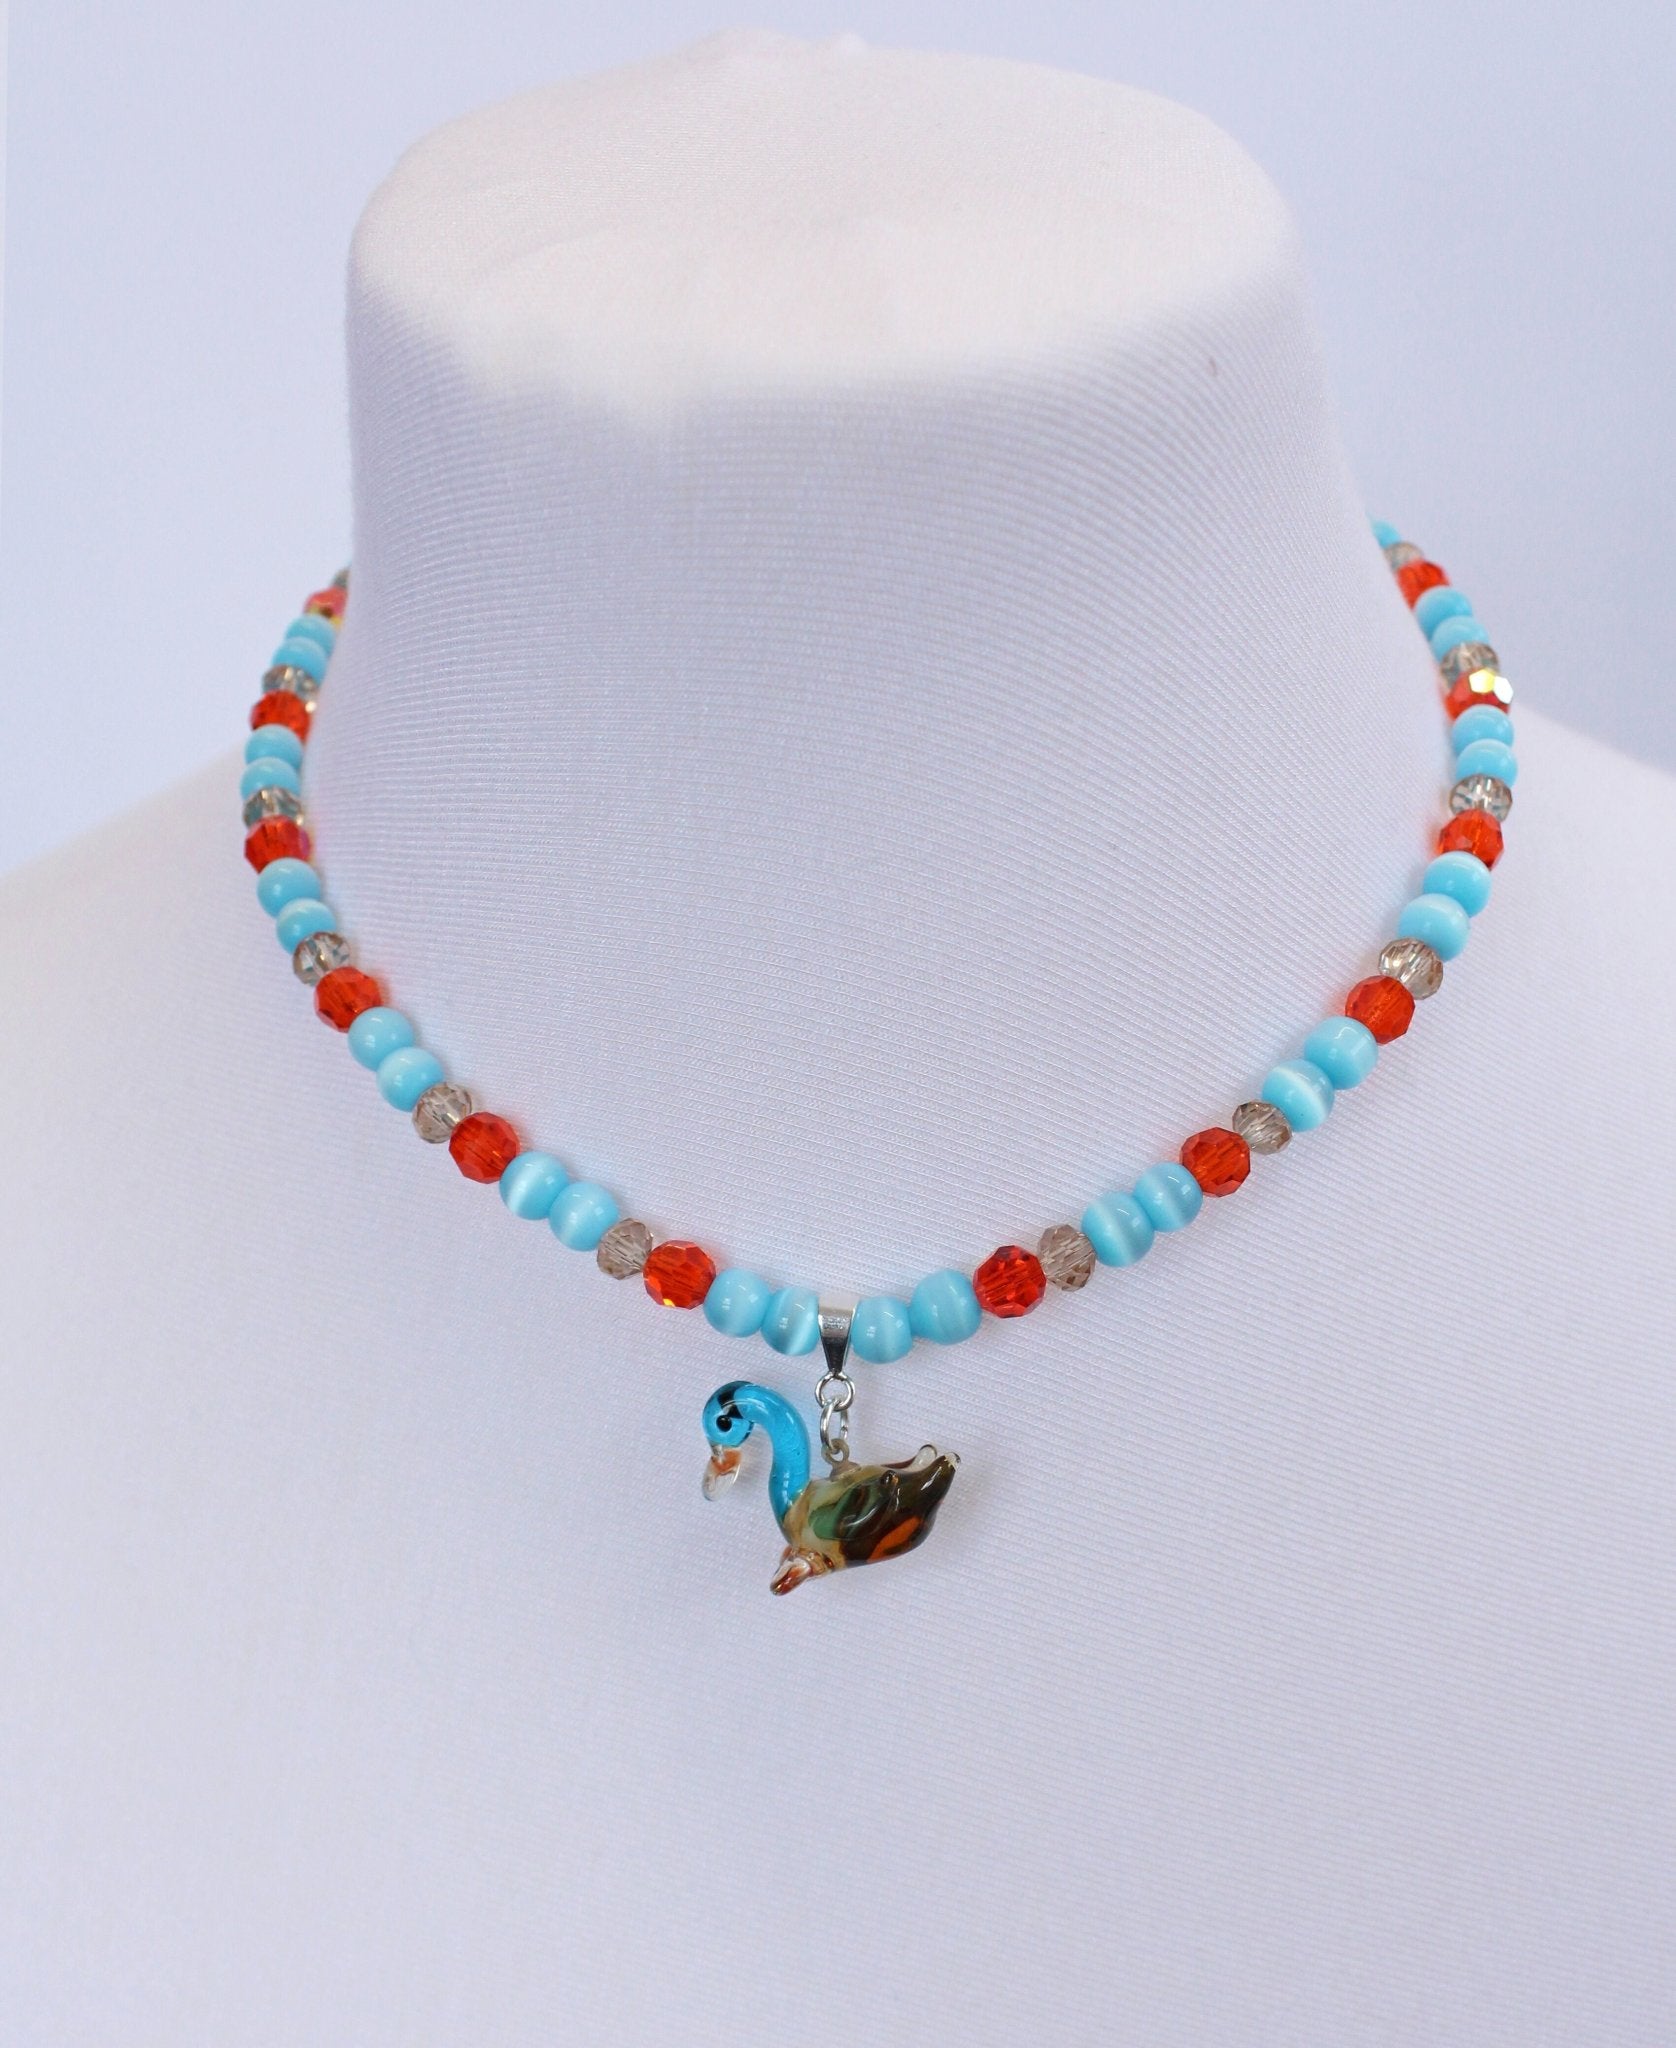 Blue & Orange Glass Duck Necklace - Bazaare All Products